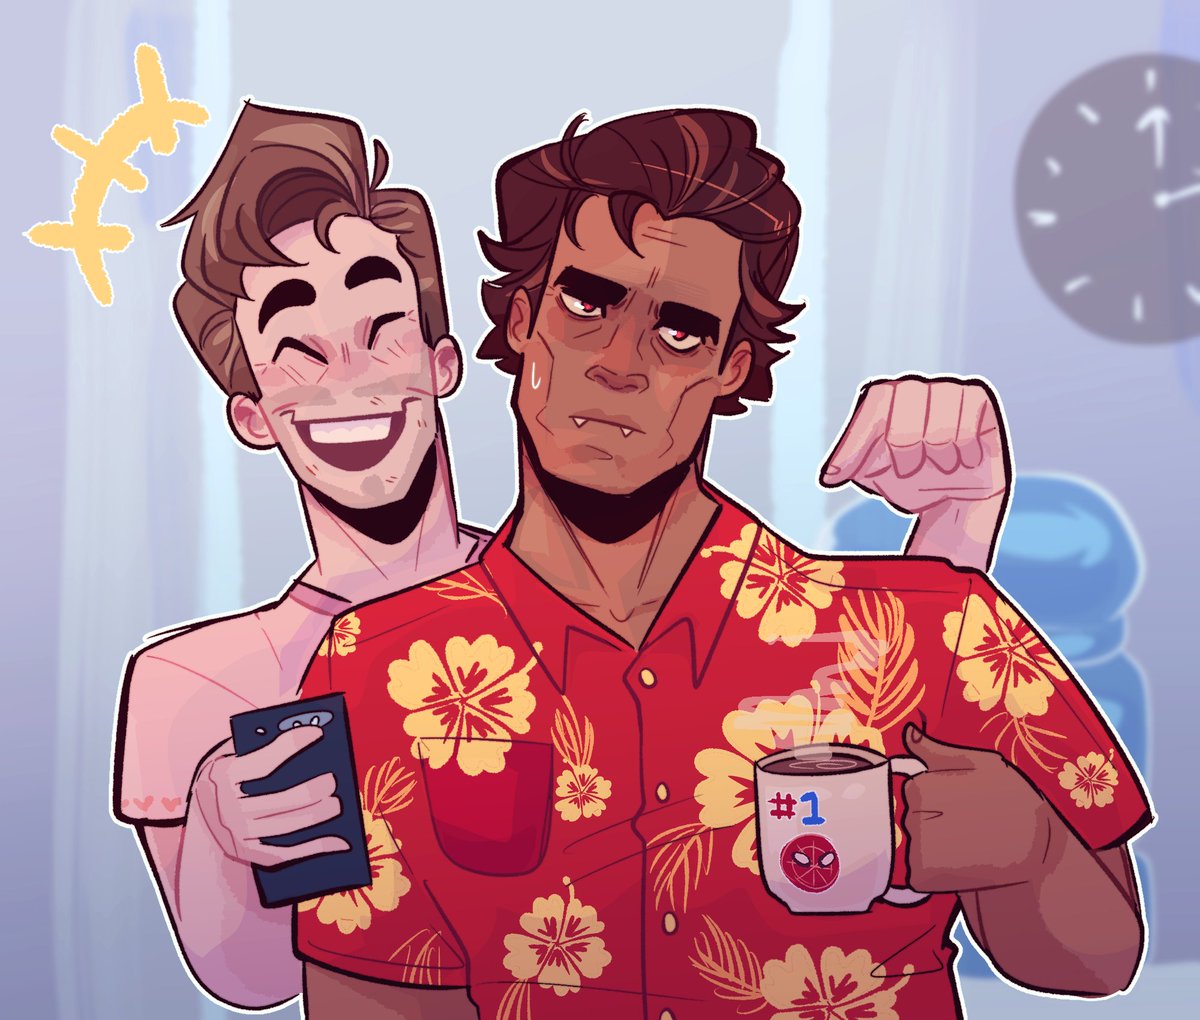 It's casual Friday at the Spidey office

#SpiderVerse #spiderdads